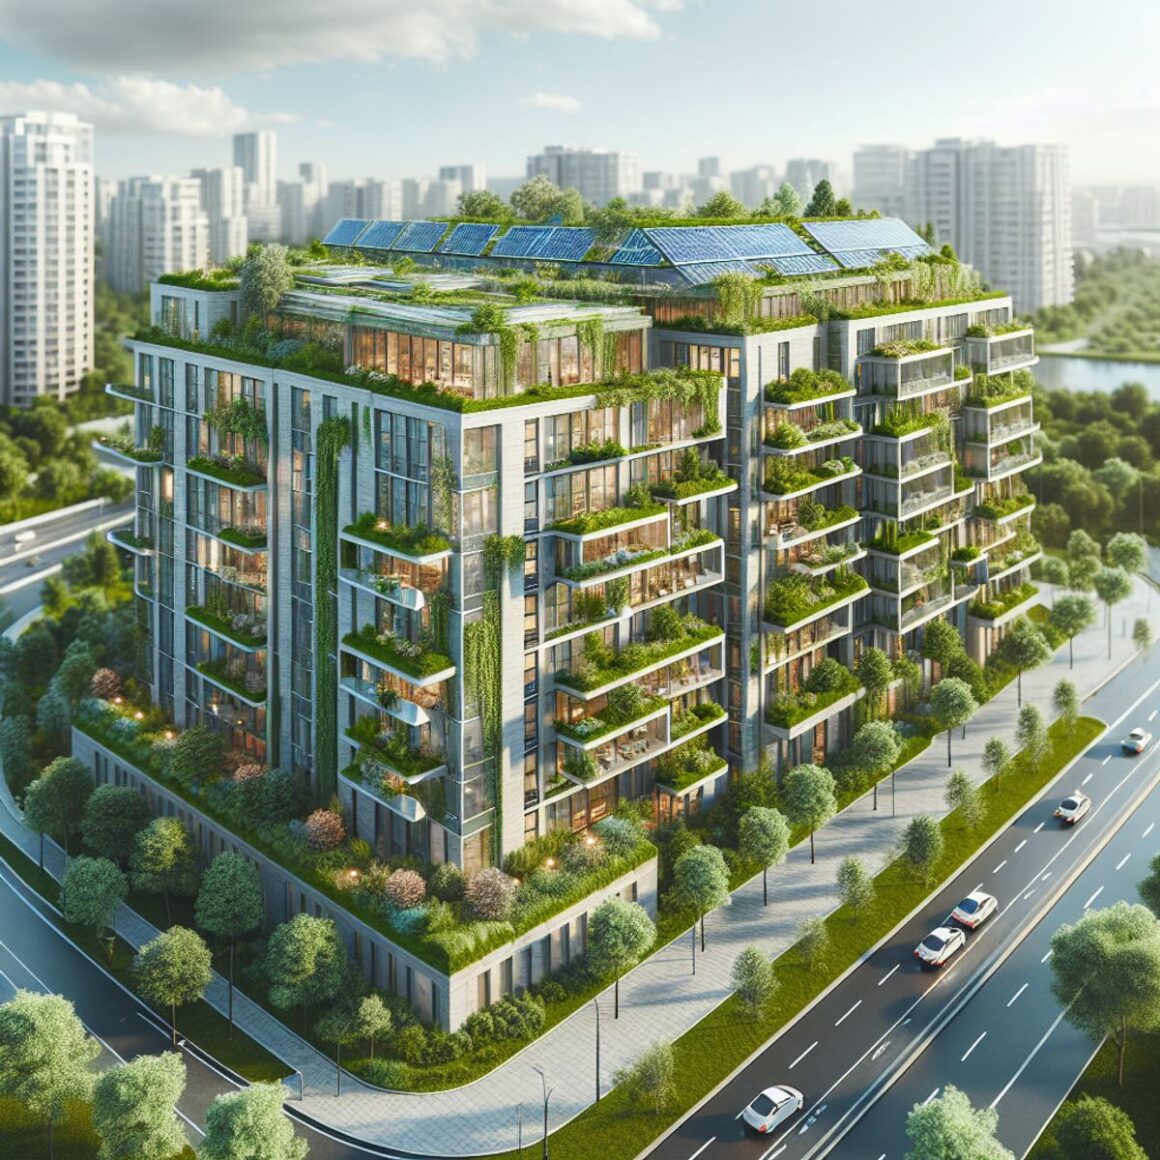 A contemporary apartment building with eco-friendly features and solar panels surrounded by lush greenery.